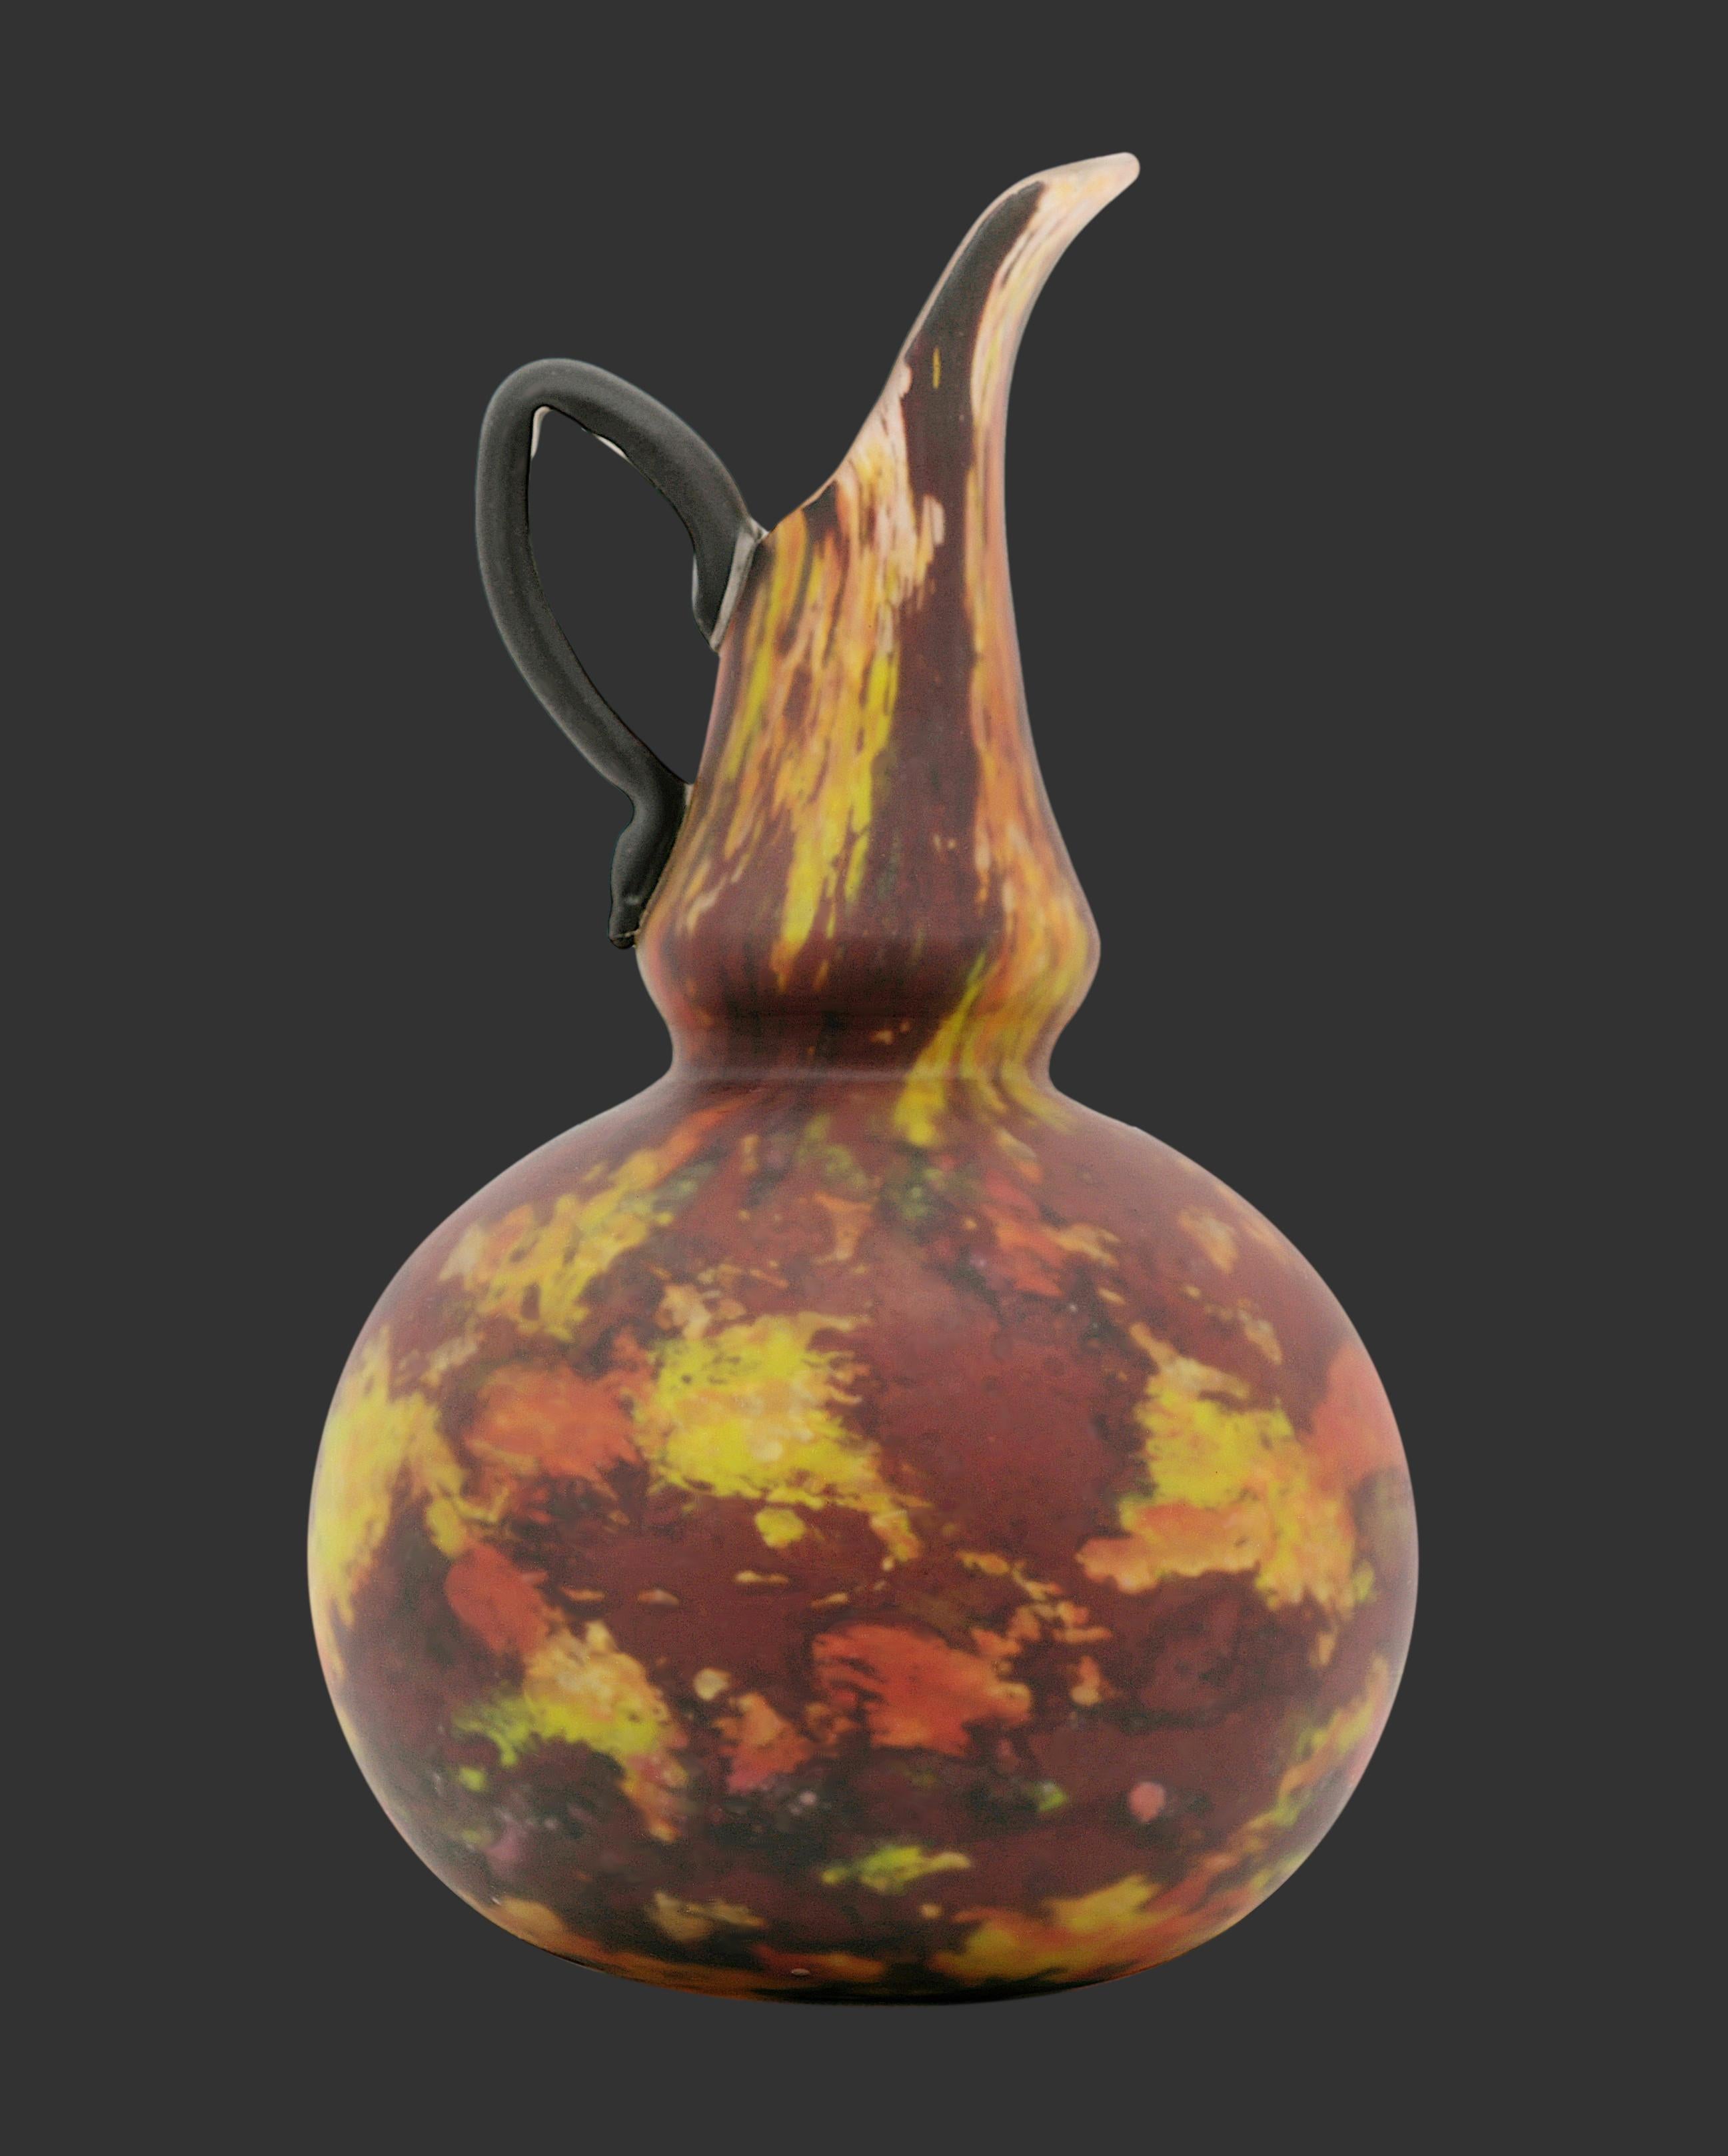 French Art Deco pitcher ewer by Charles Schneider, Epinay-sur-Seine (Paris), 1924-1928. Large and heavy  pitcher or ewer in mate mottled warmly colored glass. Enamels are applied applied between to layers. Schneider pieces are rare in matte finish.